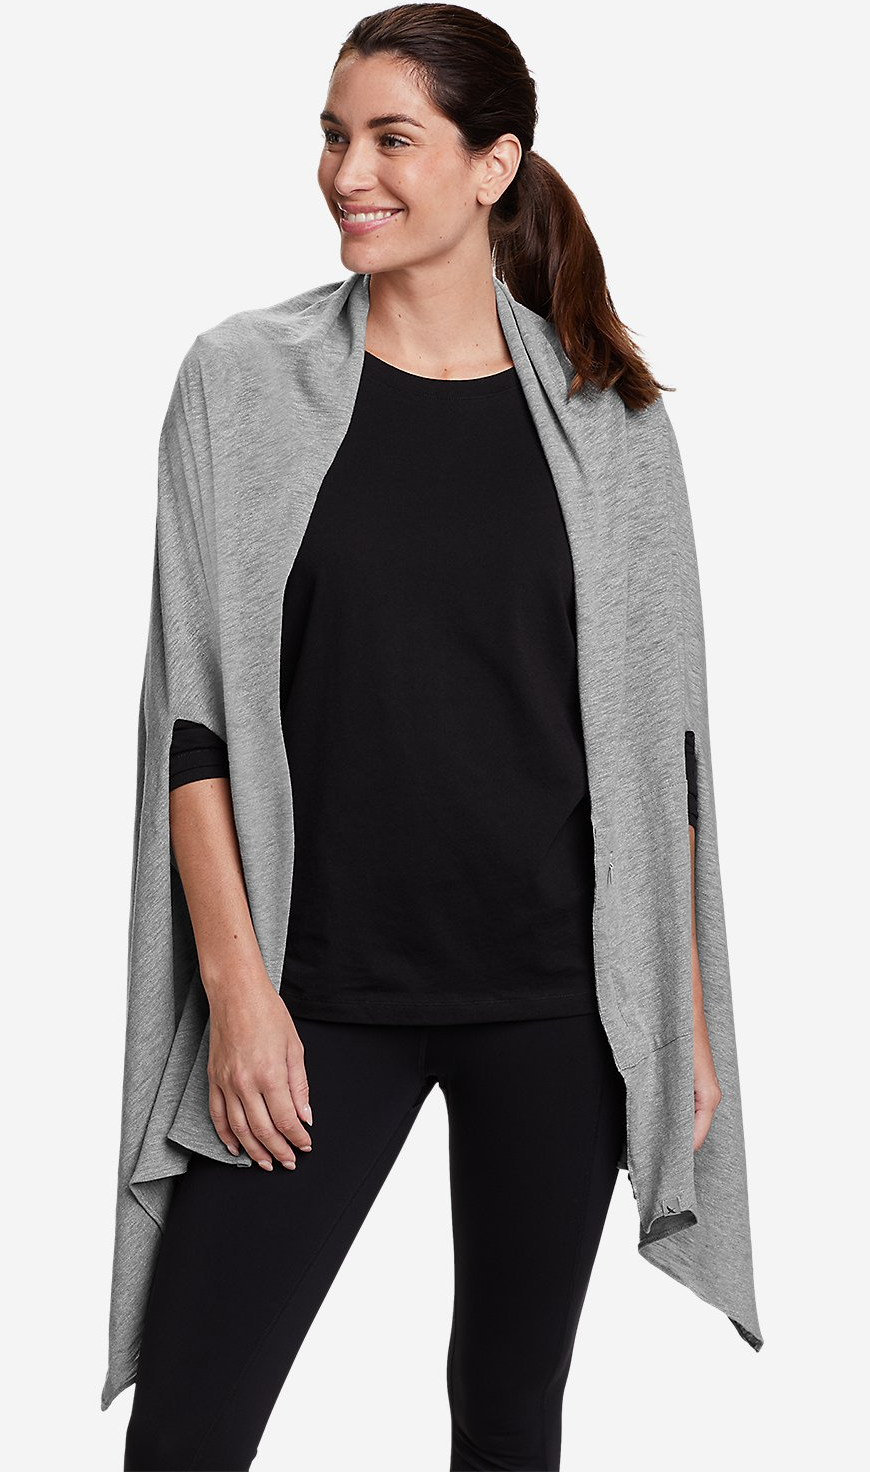 Form Meets Function with Women's Hidden Pocket Clothing for Travel